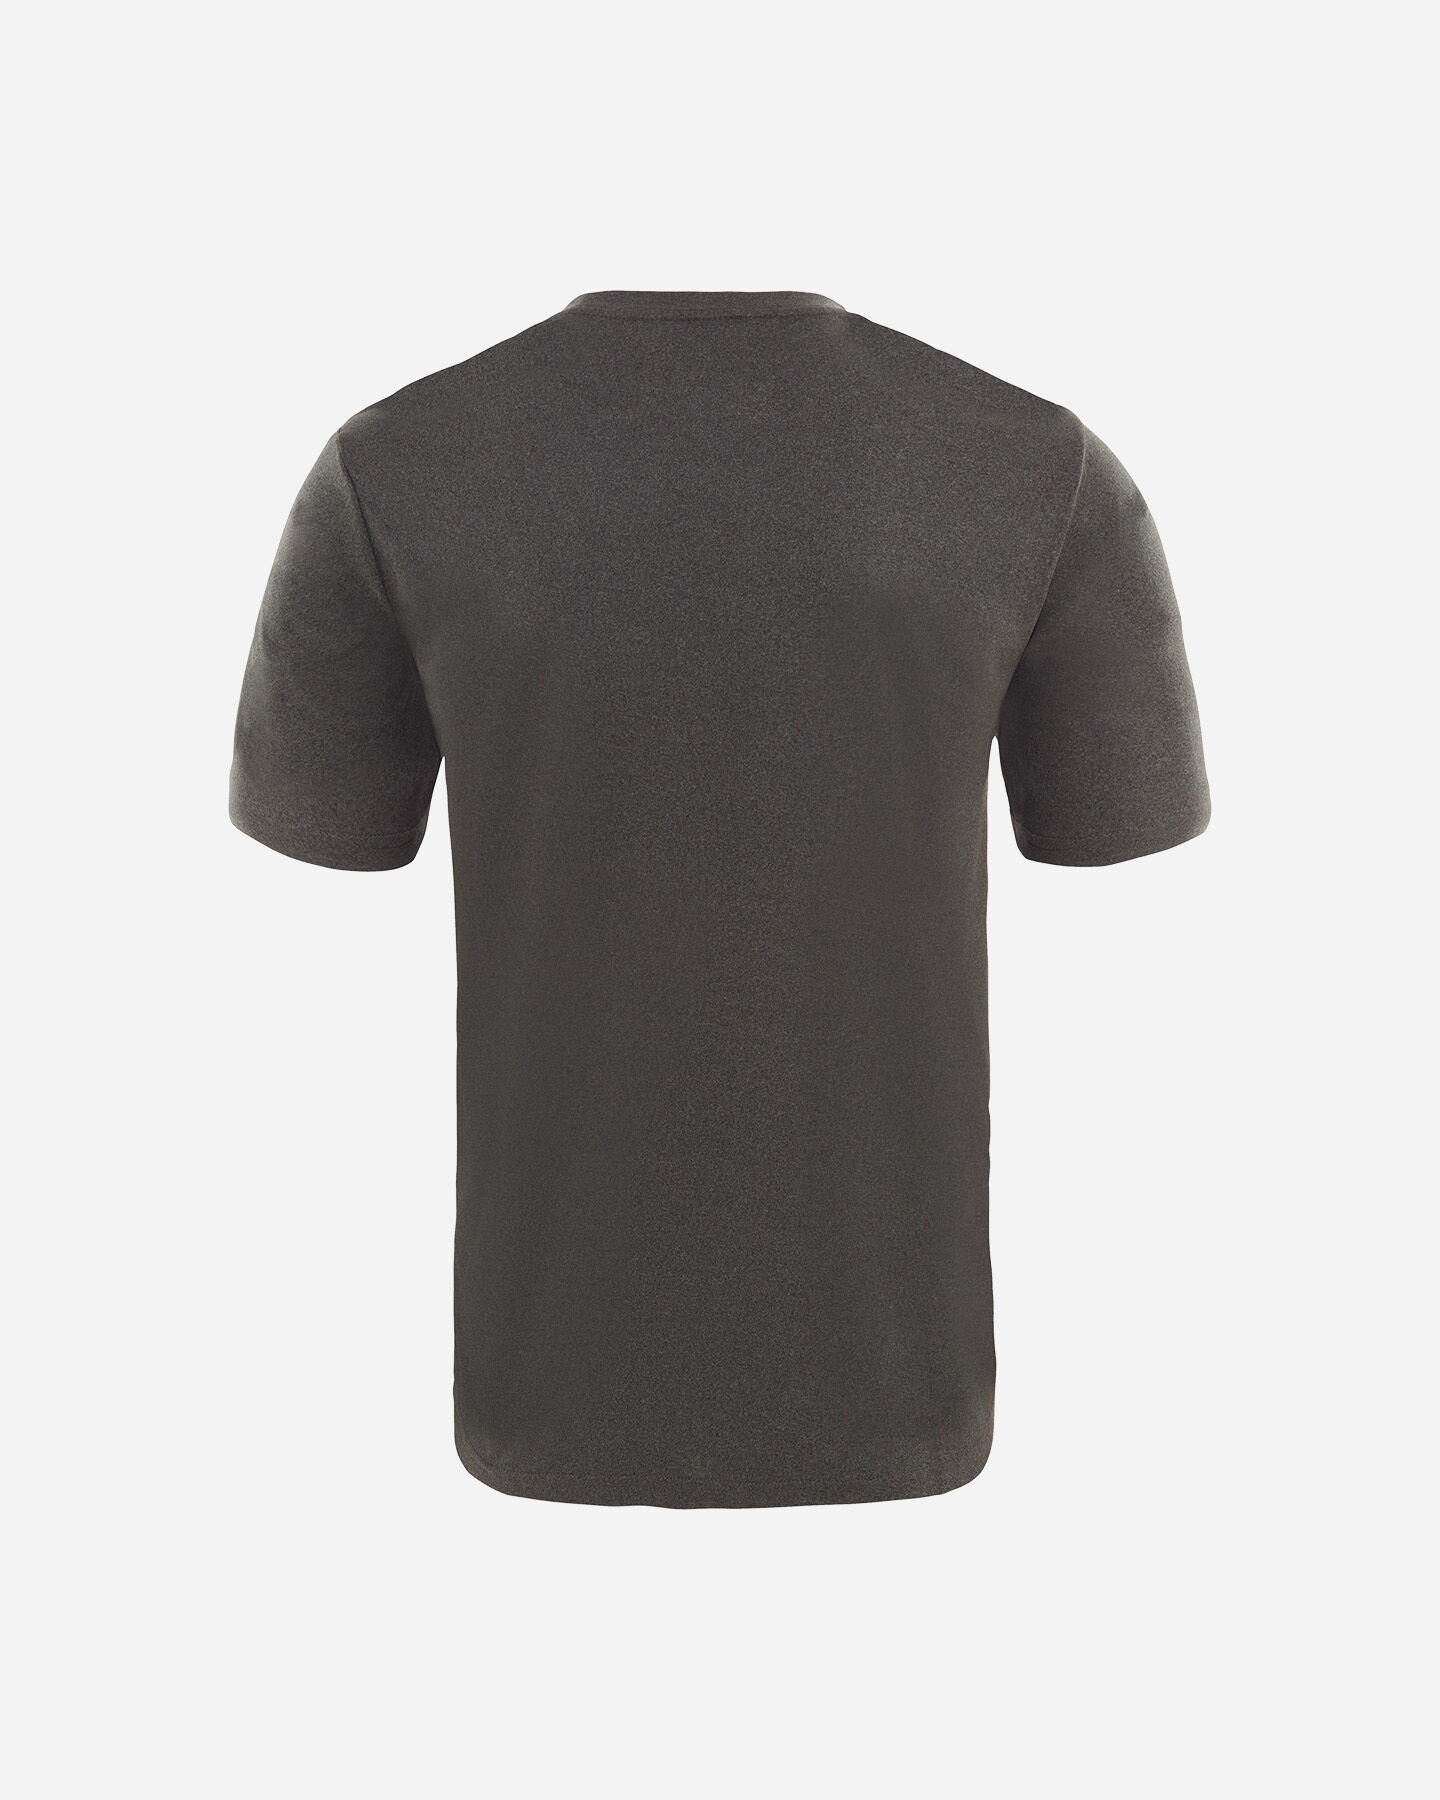  T-Shirt THE NORTH FACE REAXION AMP M S5017213|DYZ|XS scatto 1